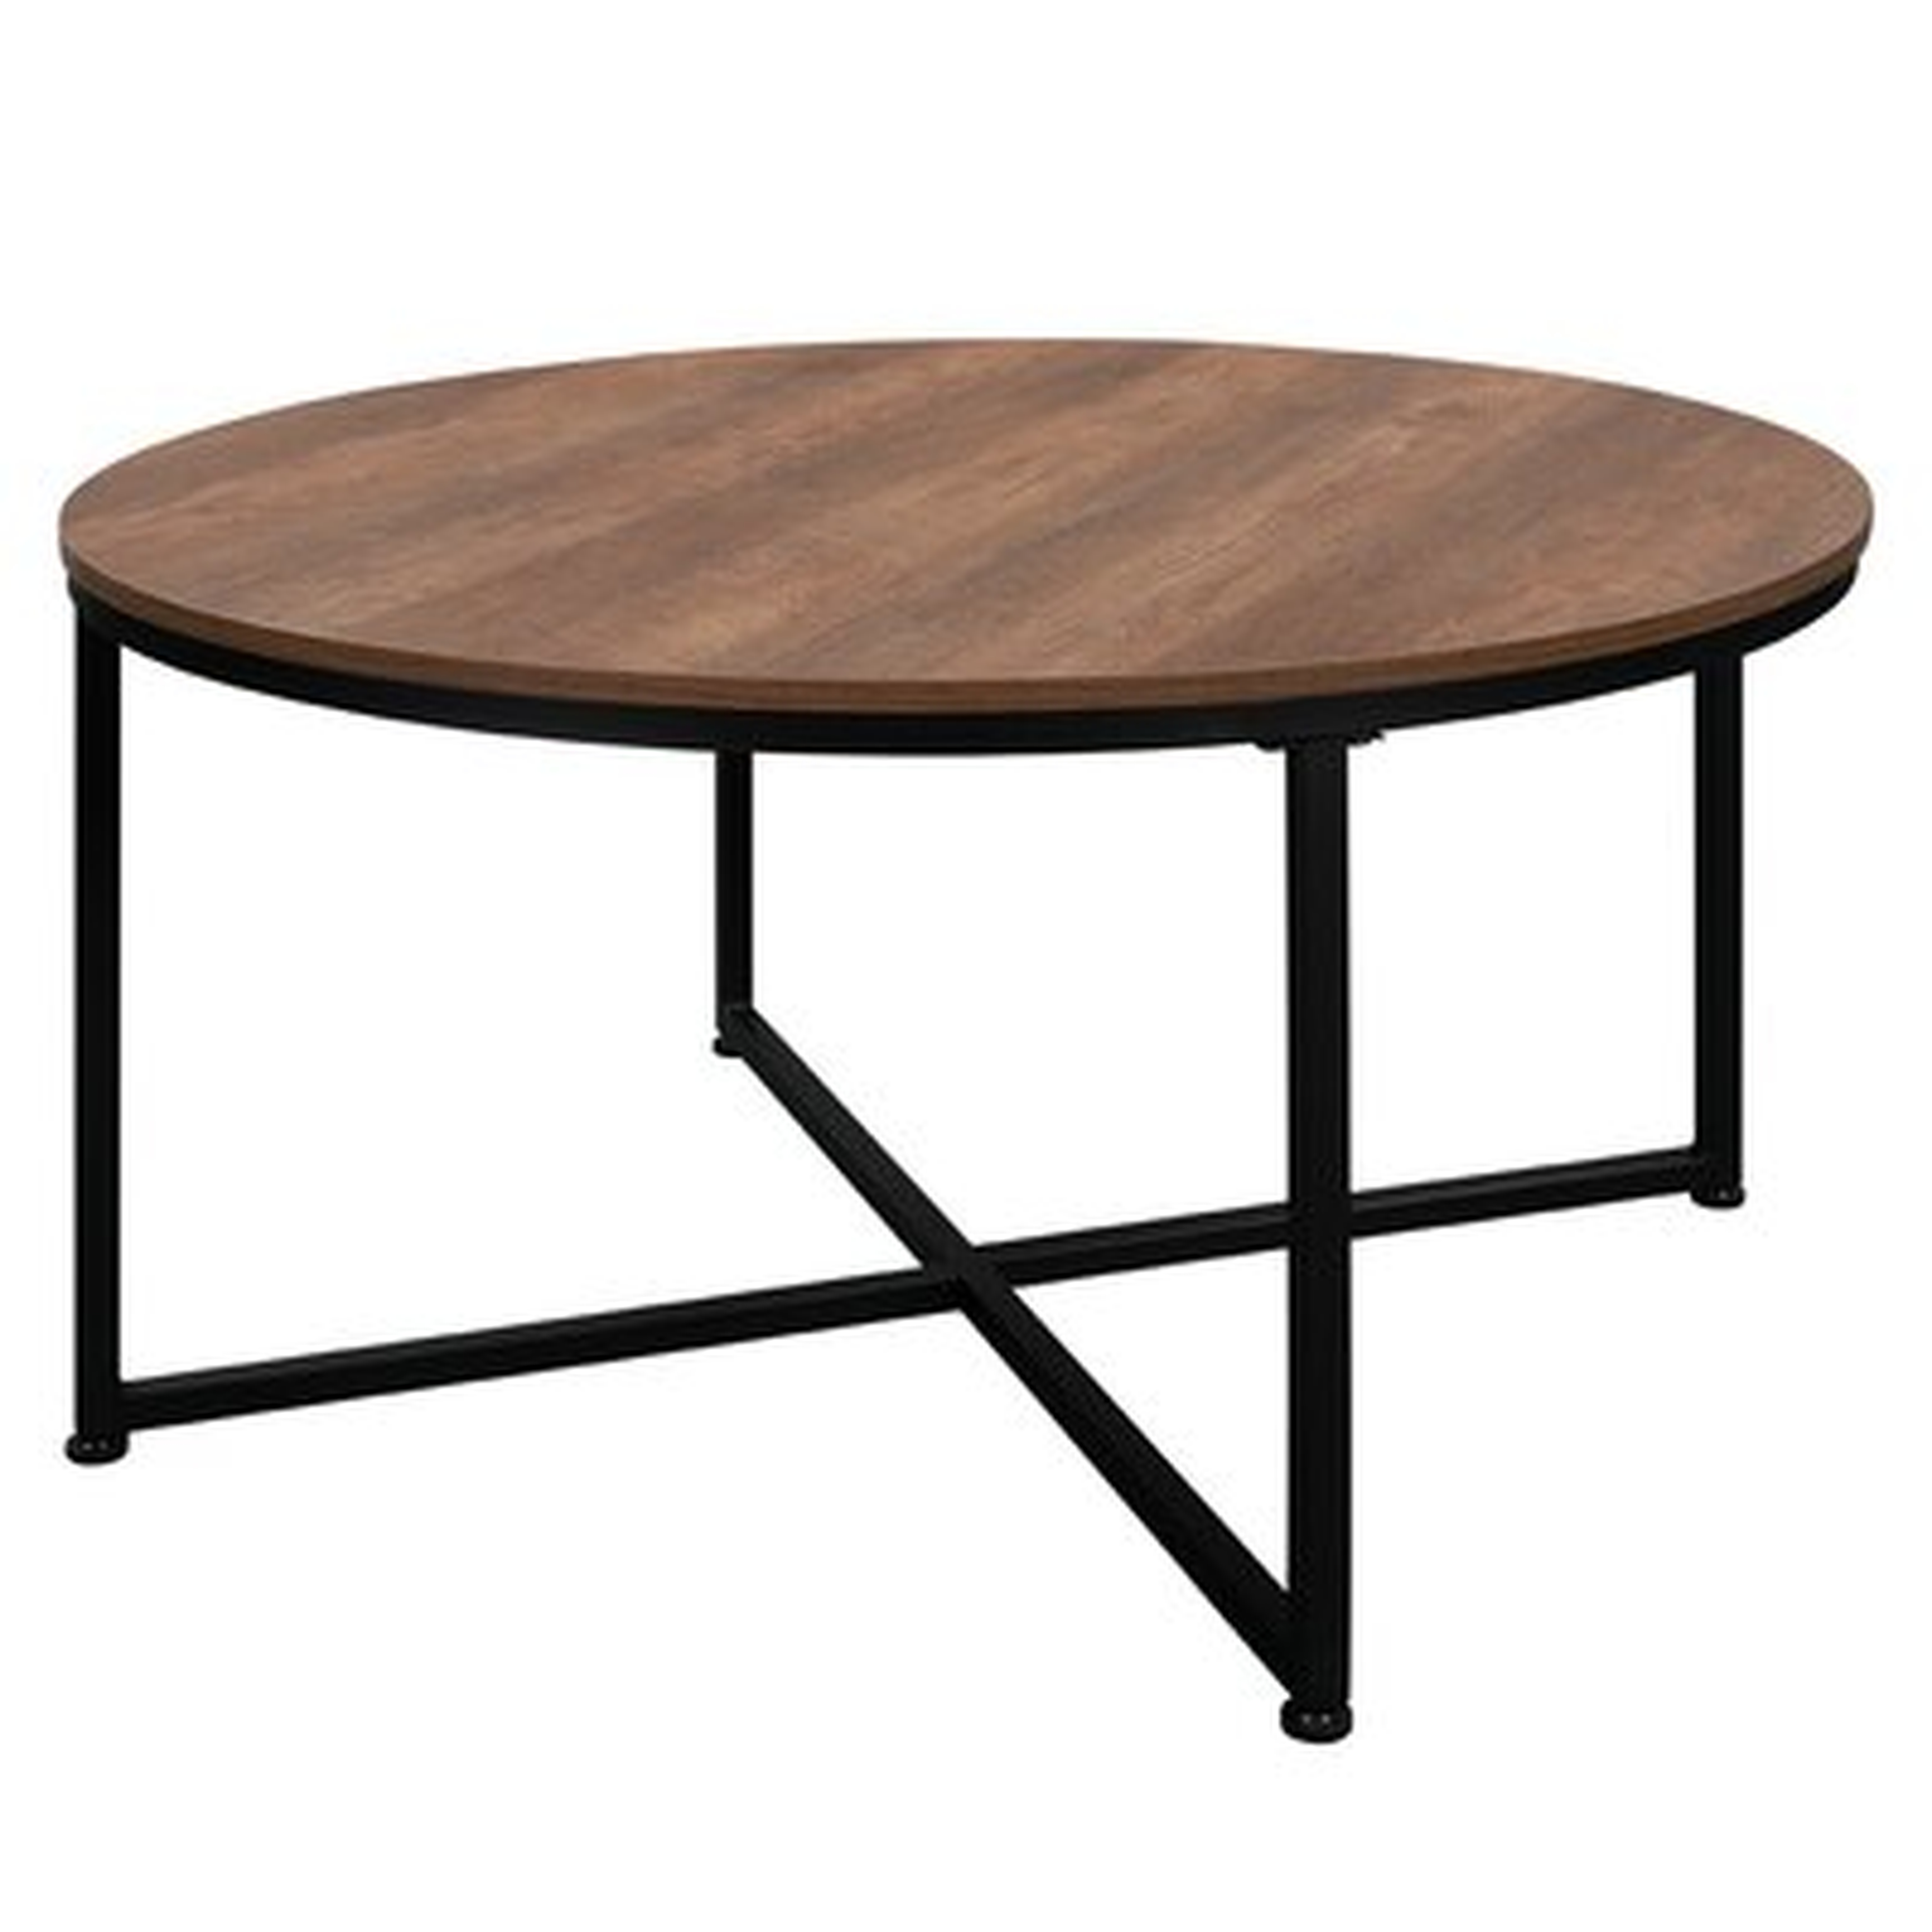 Modern Round Metal Coffee Table Wooden Table Top And Steel Frame - Wayfair